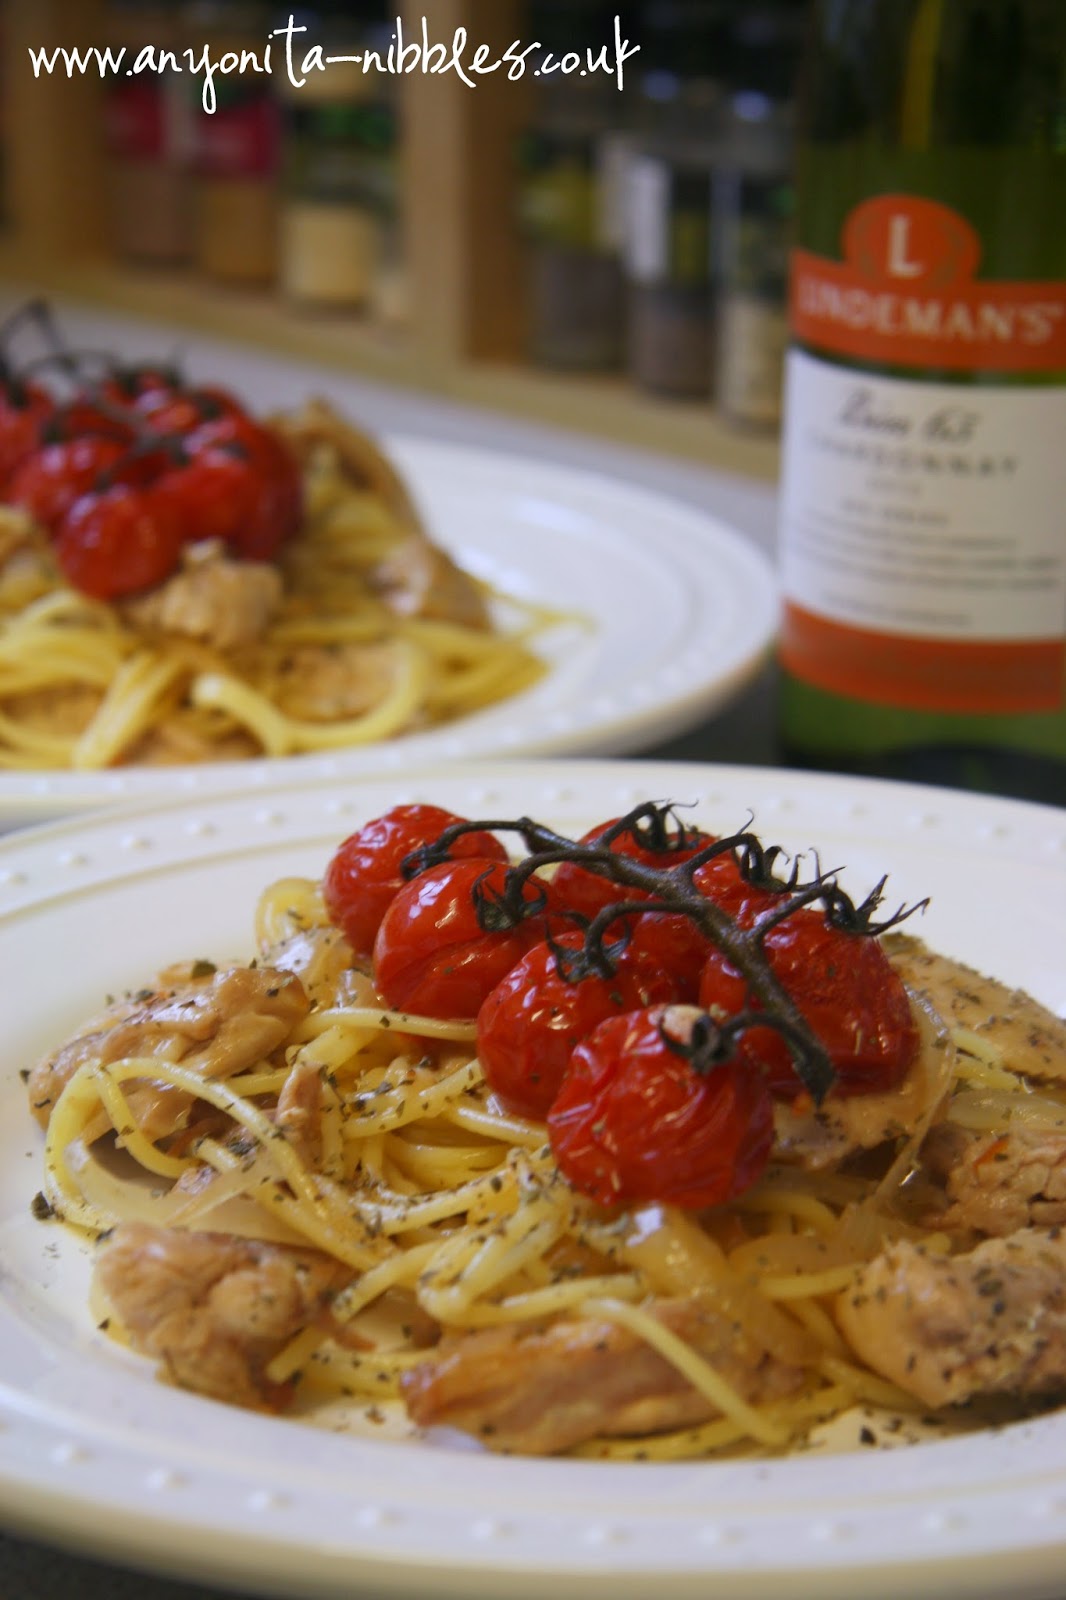 Blistered tomatoes with chicken, spaghetti and oregano from www.anyonita-nibbles.co.uk